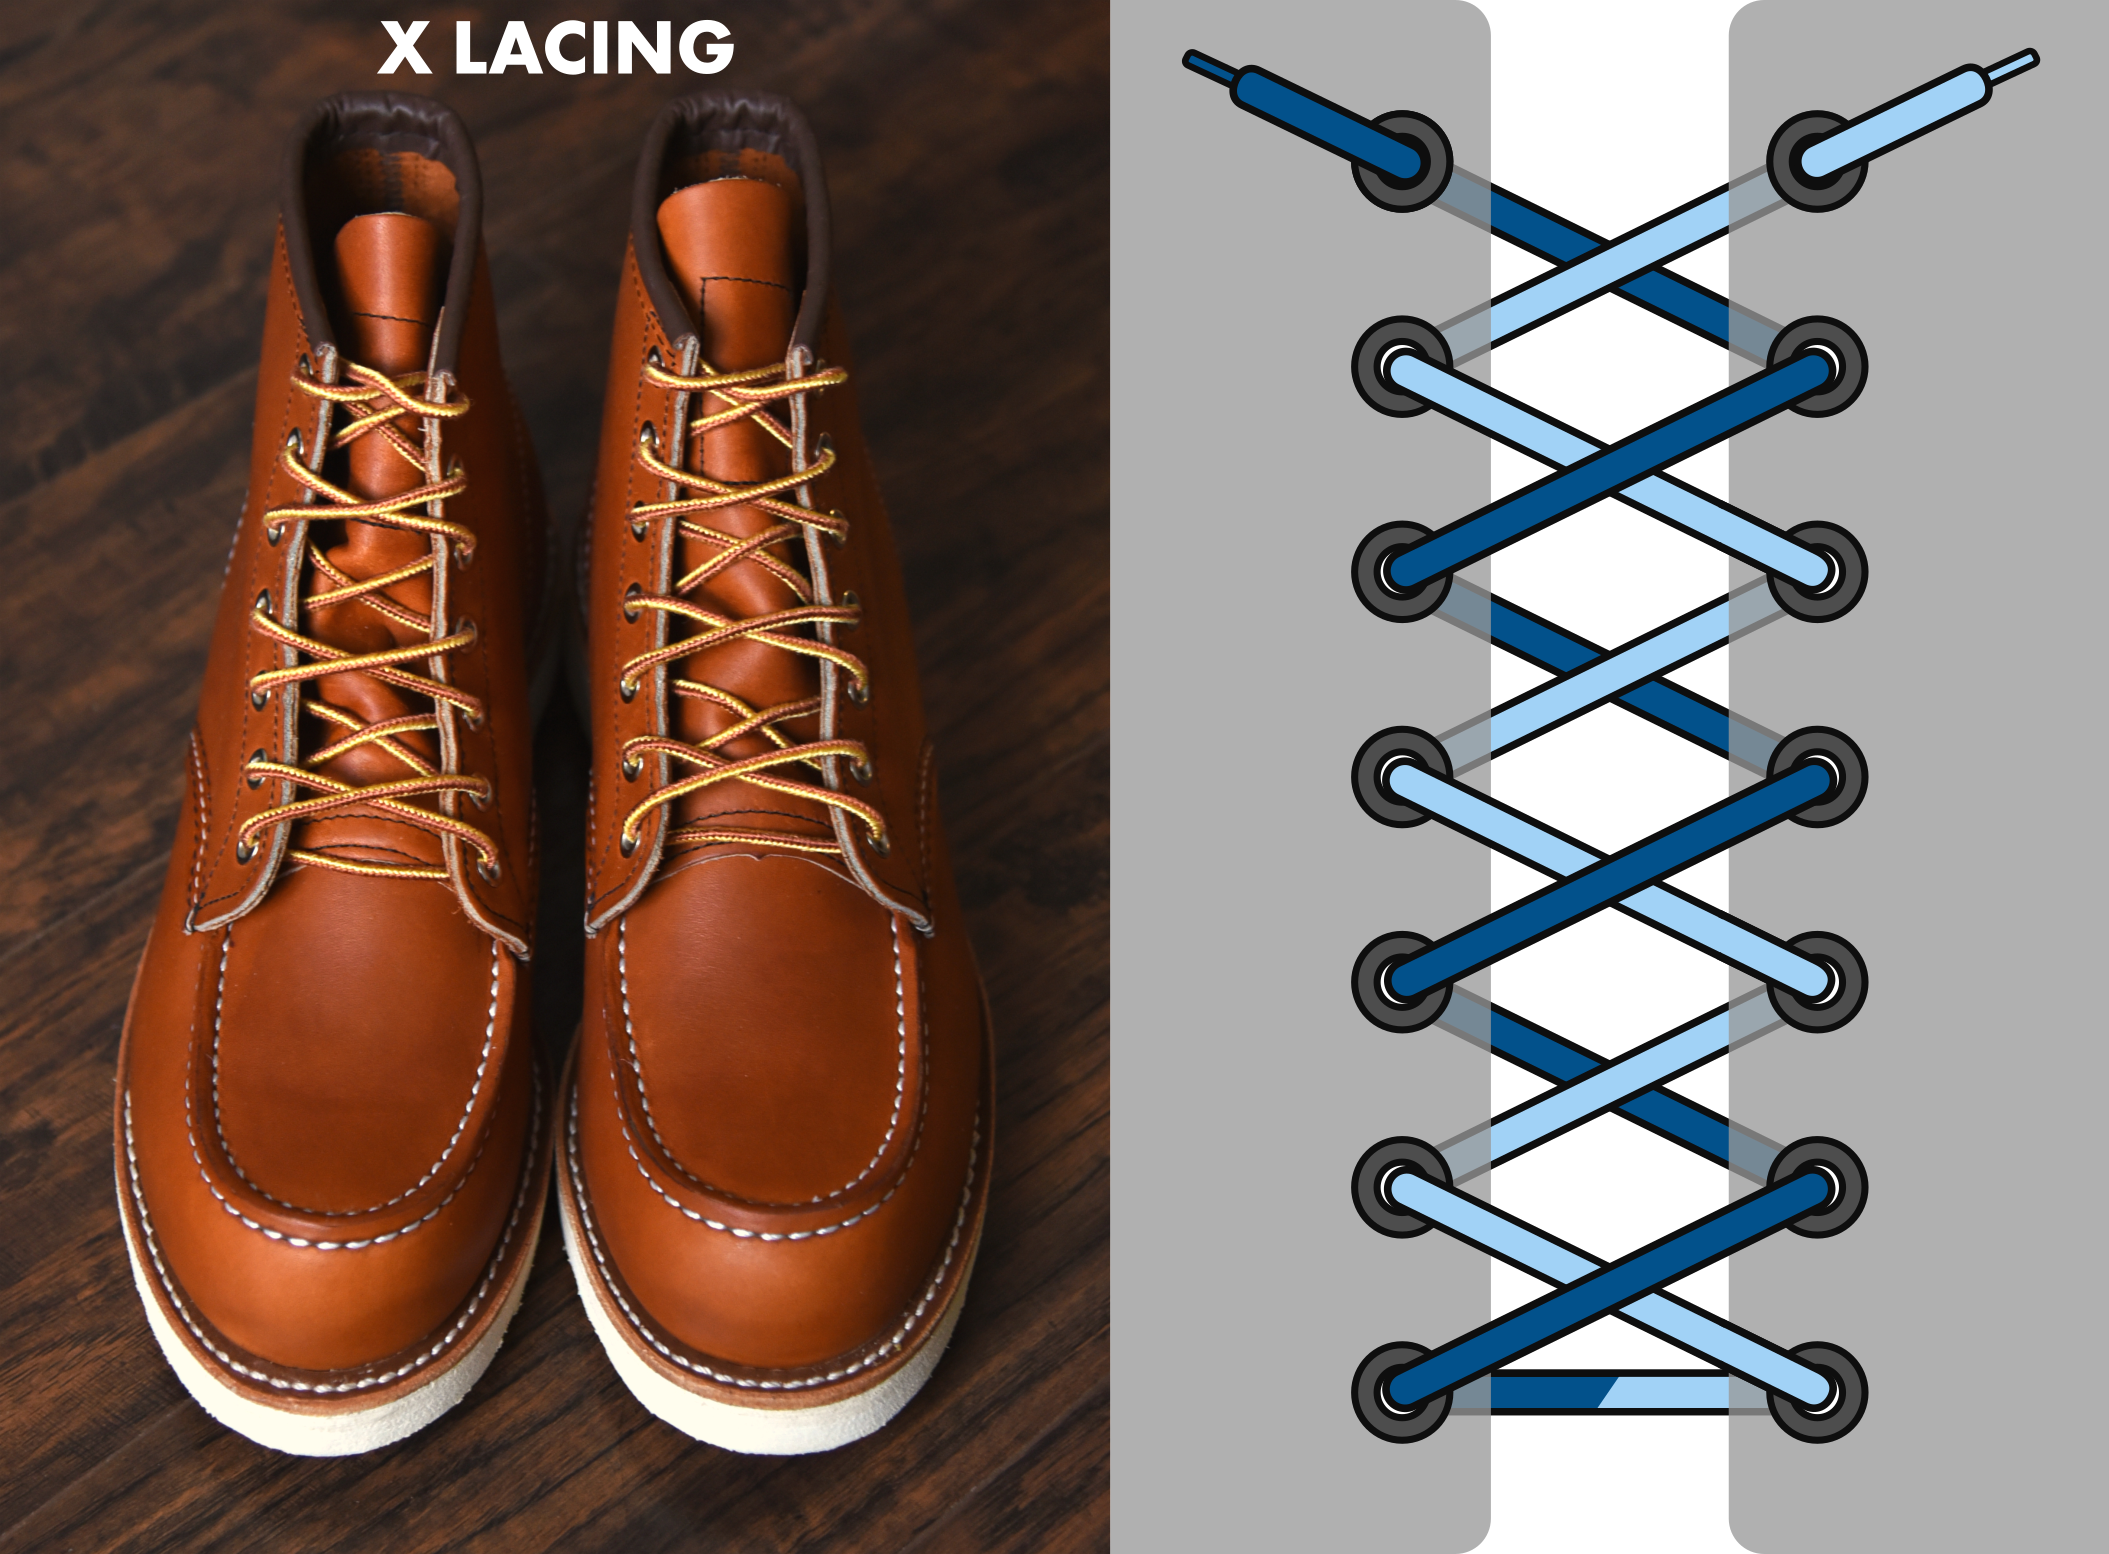 Over under or X lacing diagram for boots